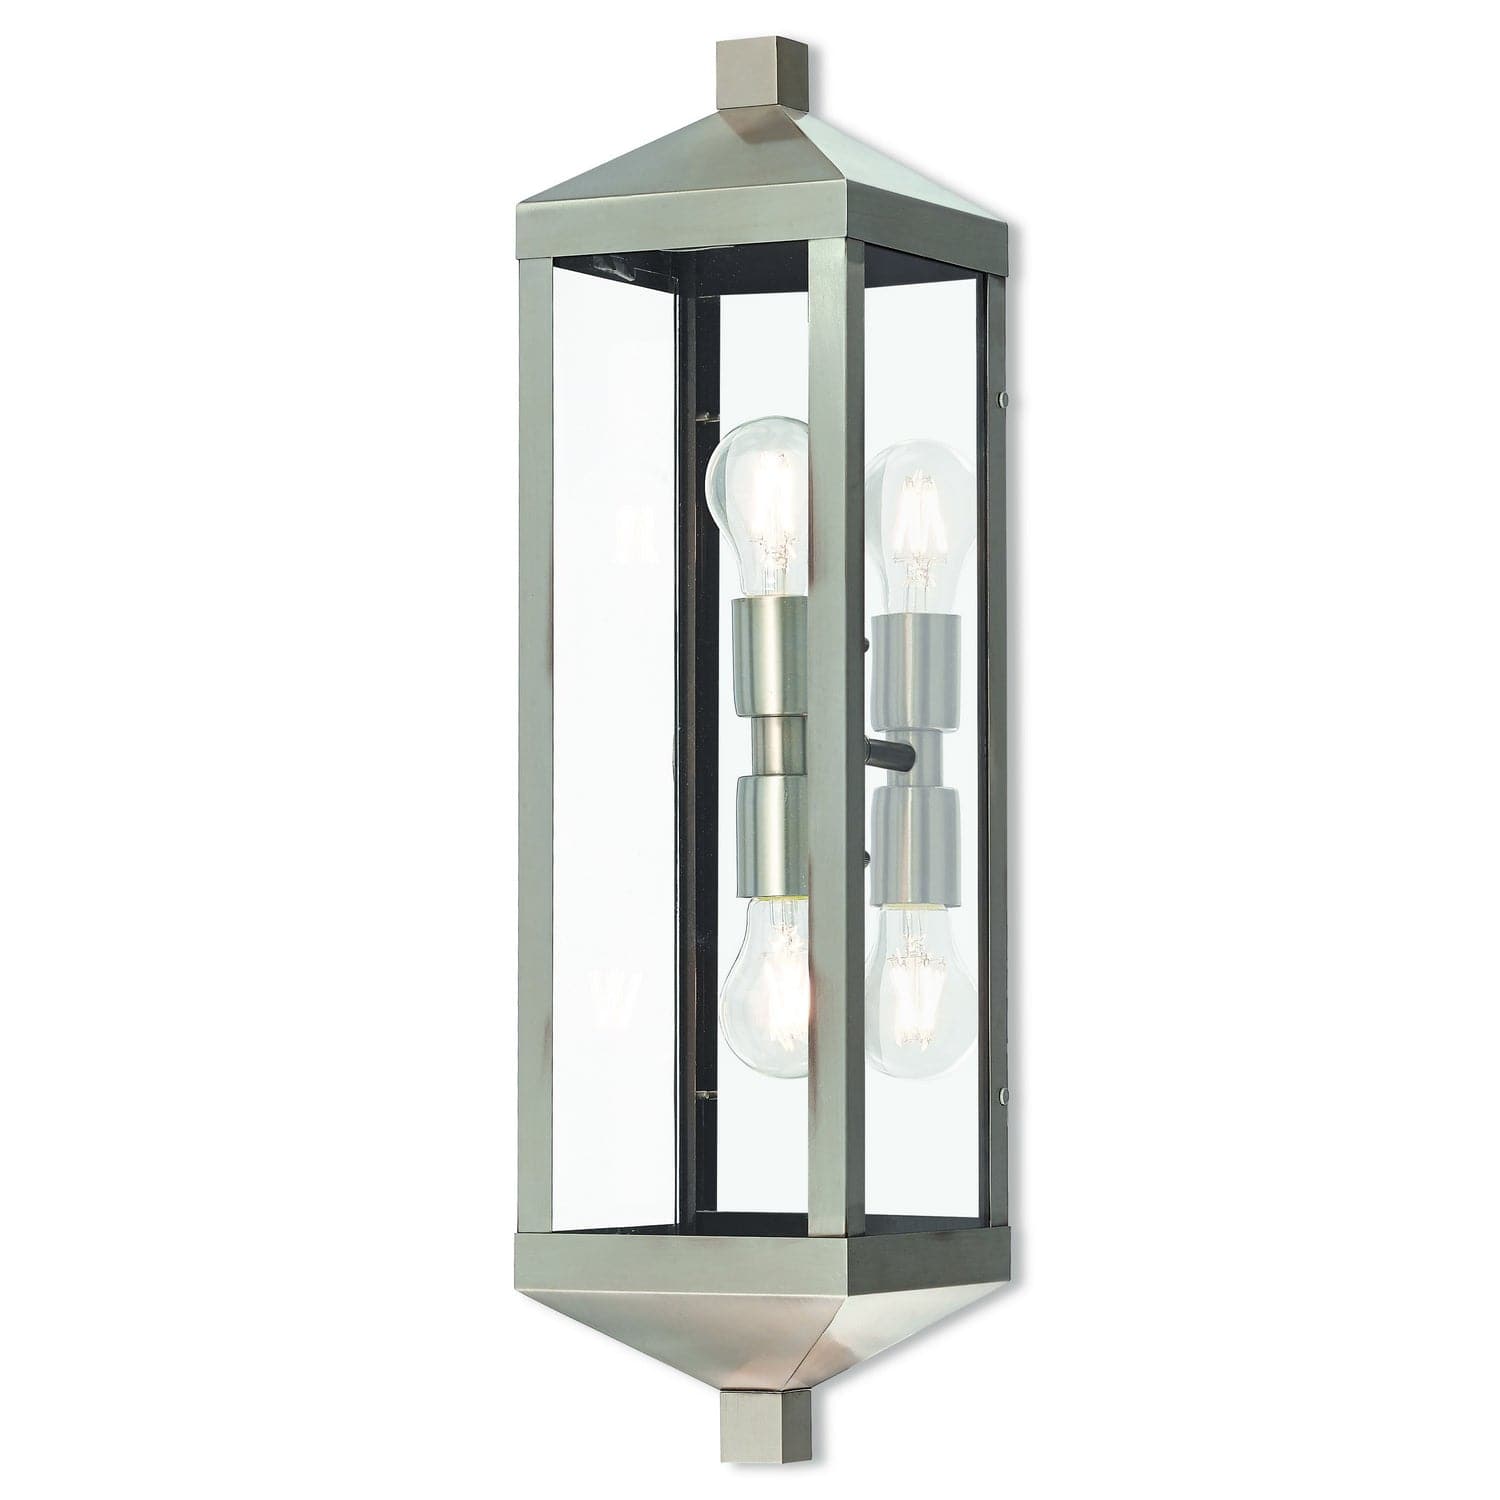 Livex Lighting - 20583-91 - Two Light Outdoor Wall Lantern - Nyack - Brushed Nickel w/ Polished Chrome Stainless Steel